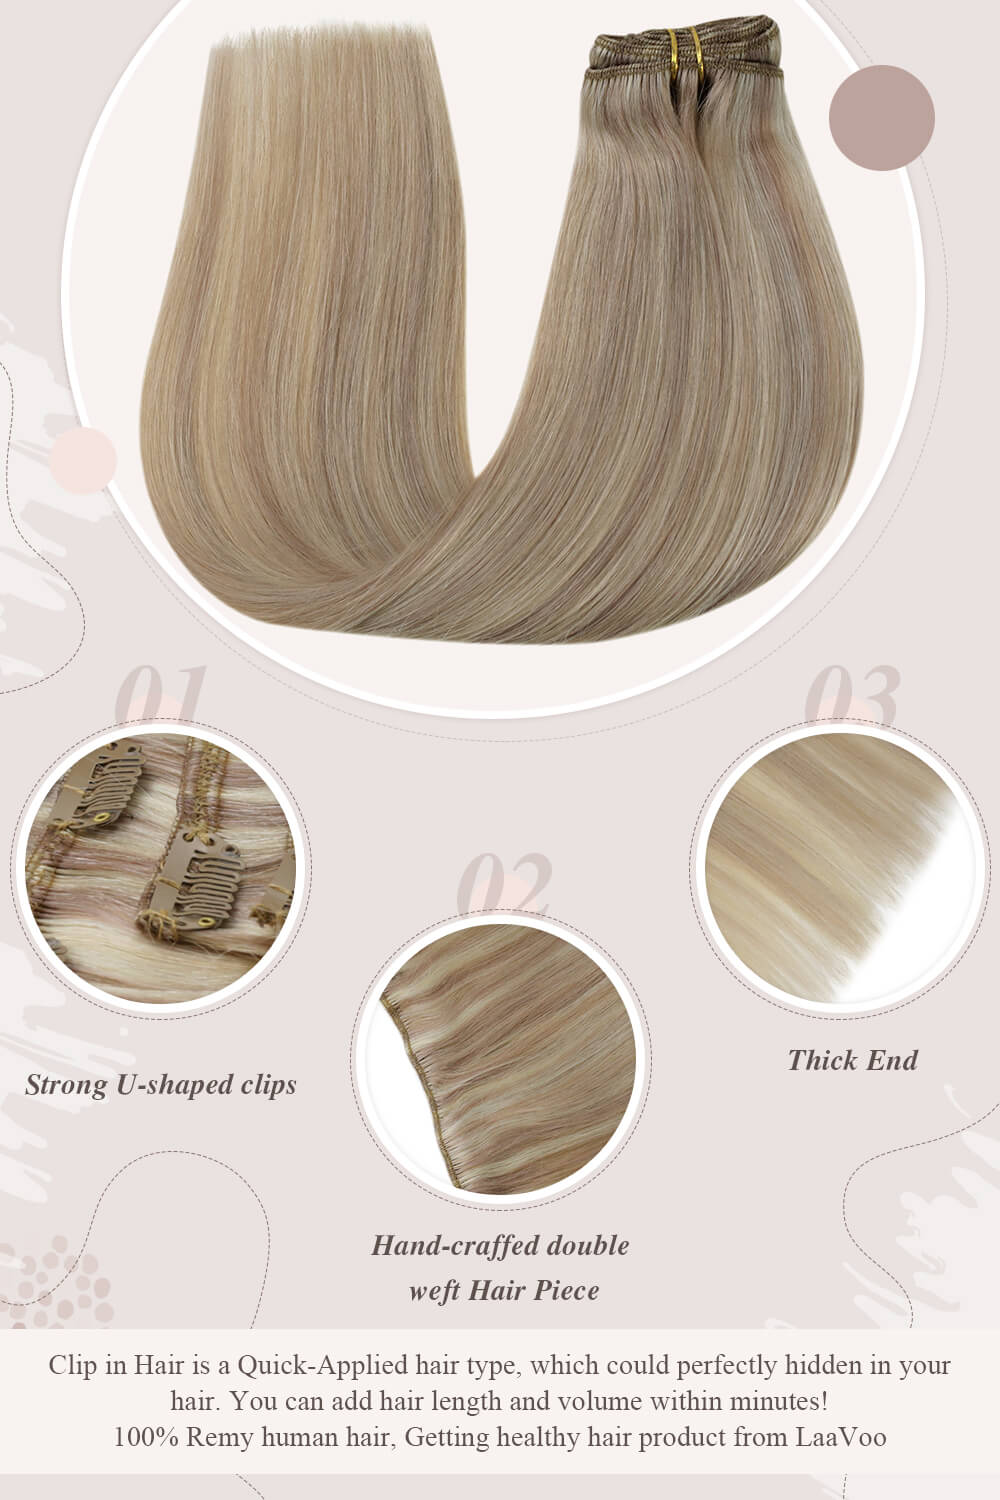 strong U shaped clips hand craffed double weft hair piece thick end clip in hair perfectly hidden in your hair you can add hair length and volume within minutes Remy human hair getting healthy hair product